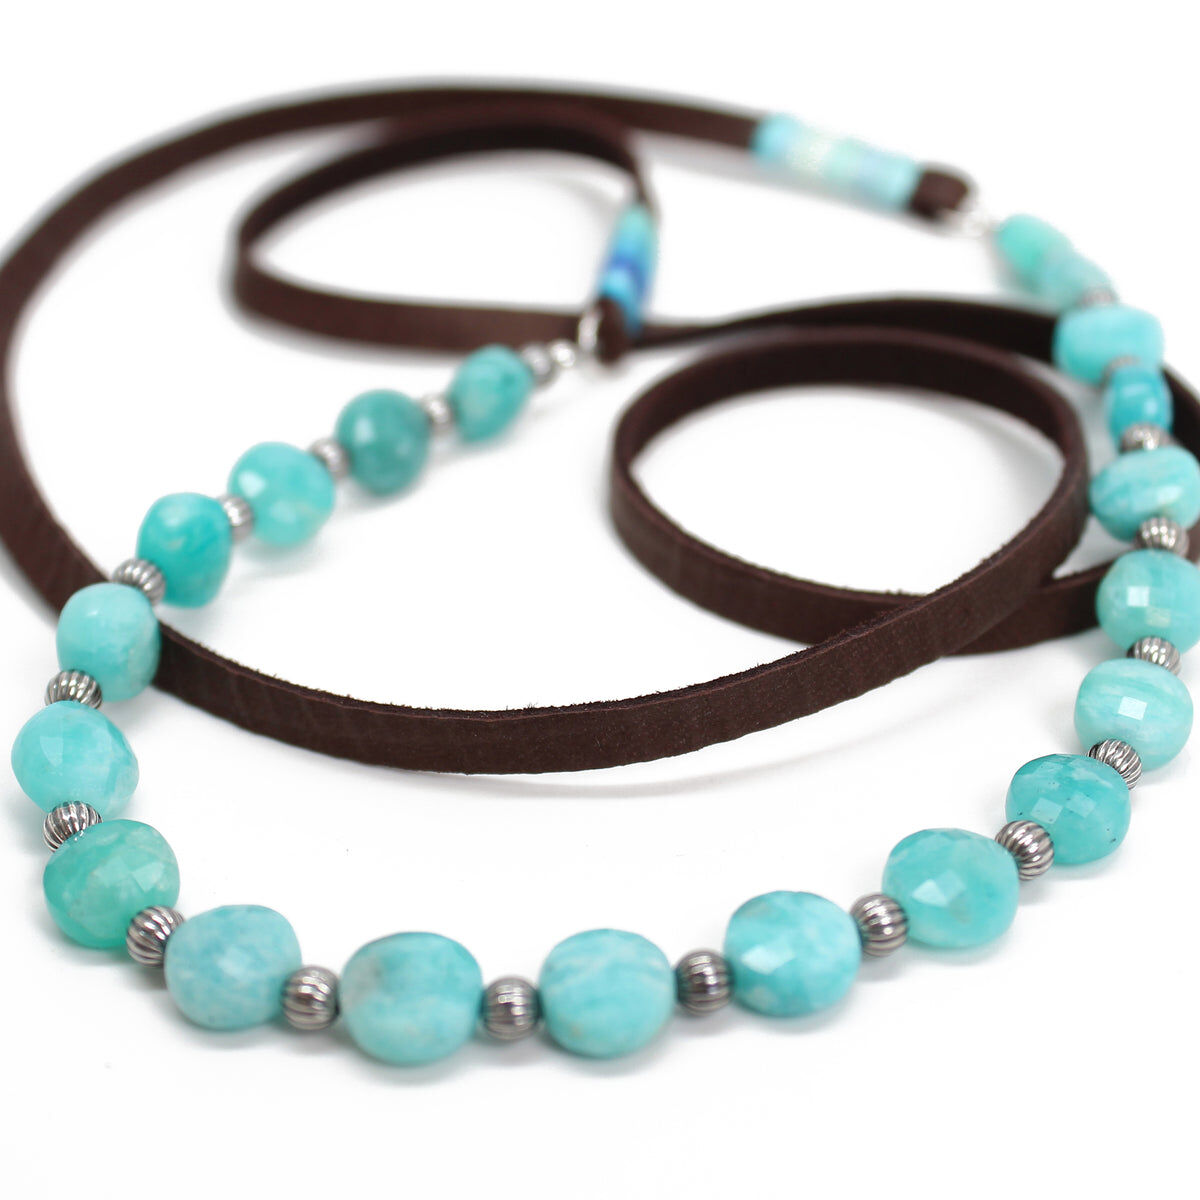 Amazonite and Leather Necklace bit.ly/3wRKyMr #amazonitejewelry #amazonitenecklace #handmadejewelry #texasmaker